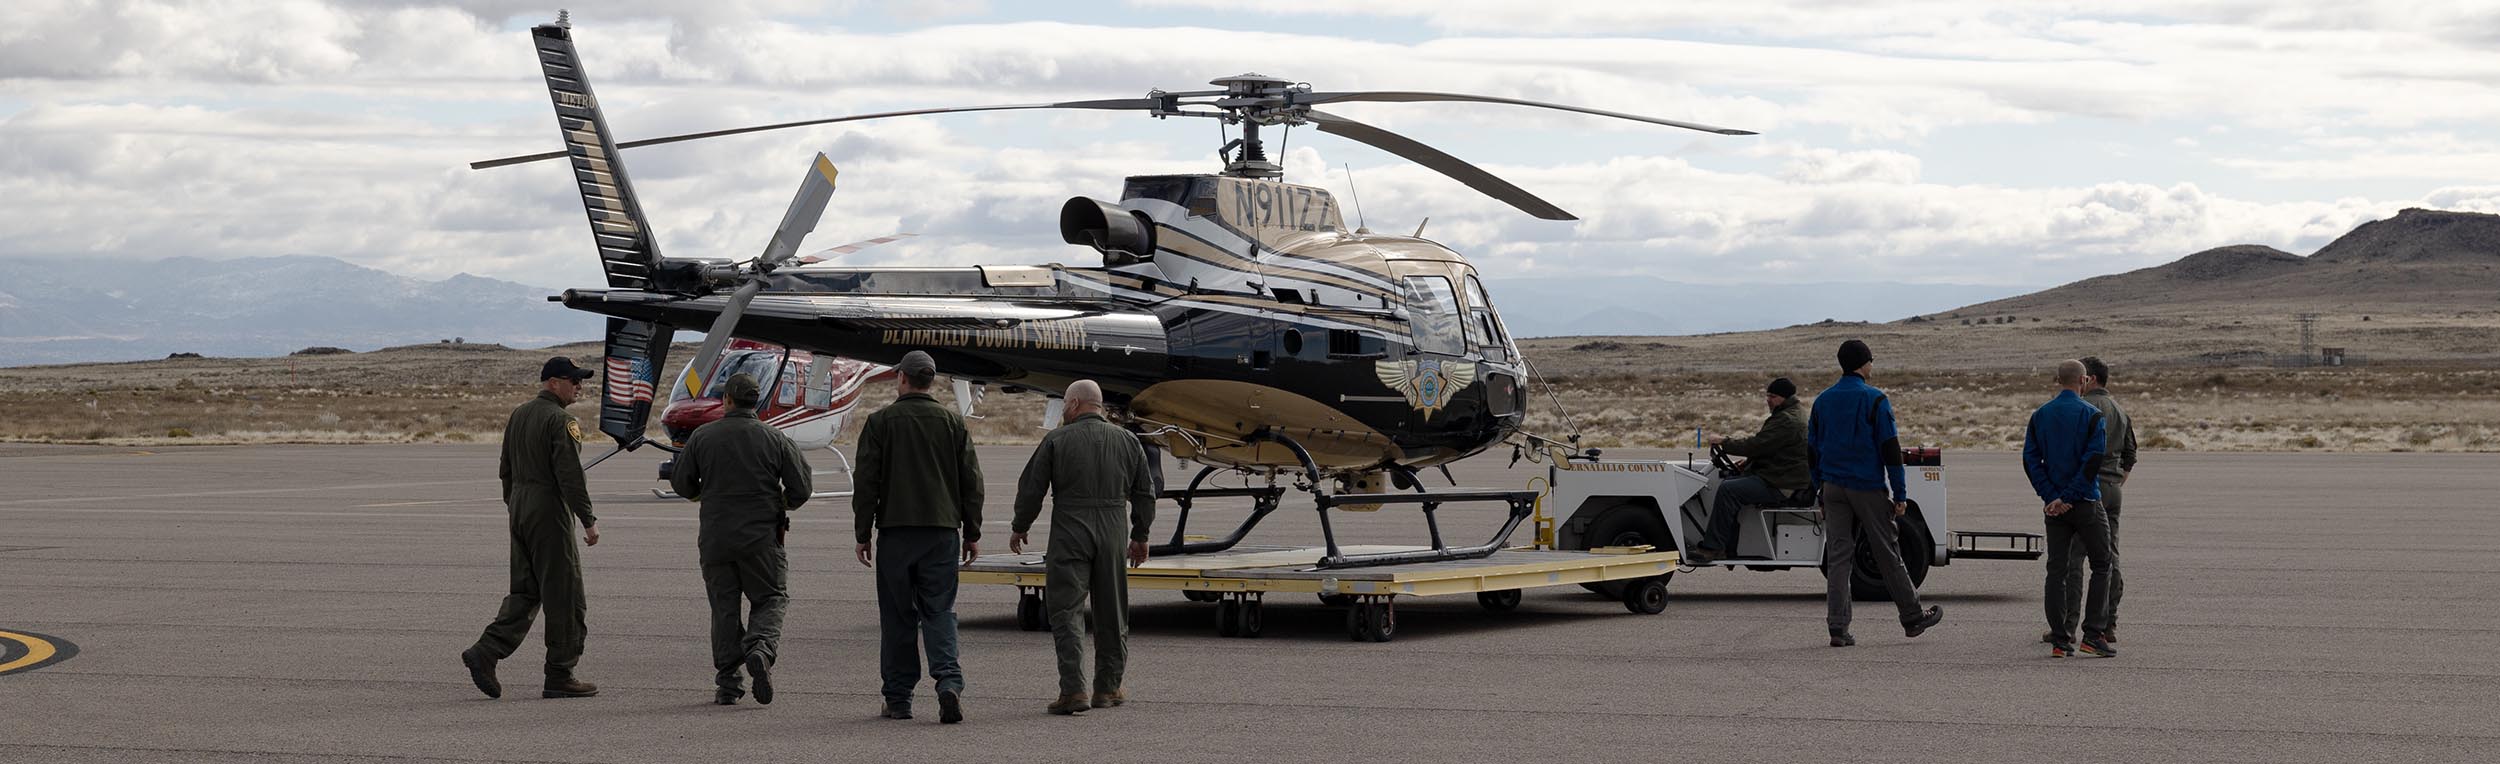 New Bernalillo County Sheriff's Helicopter